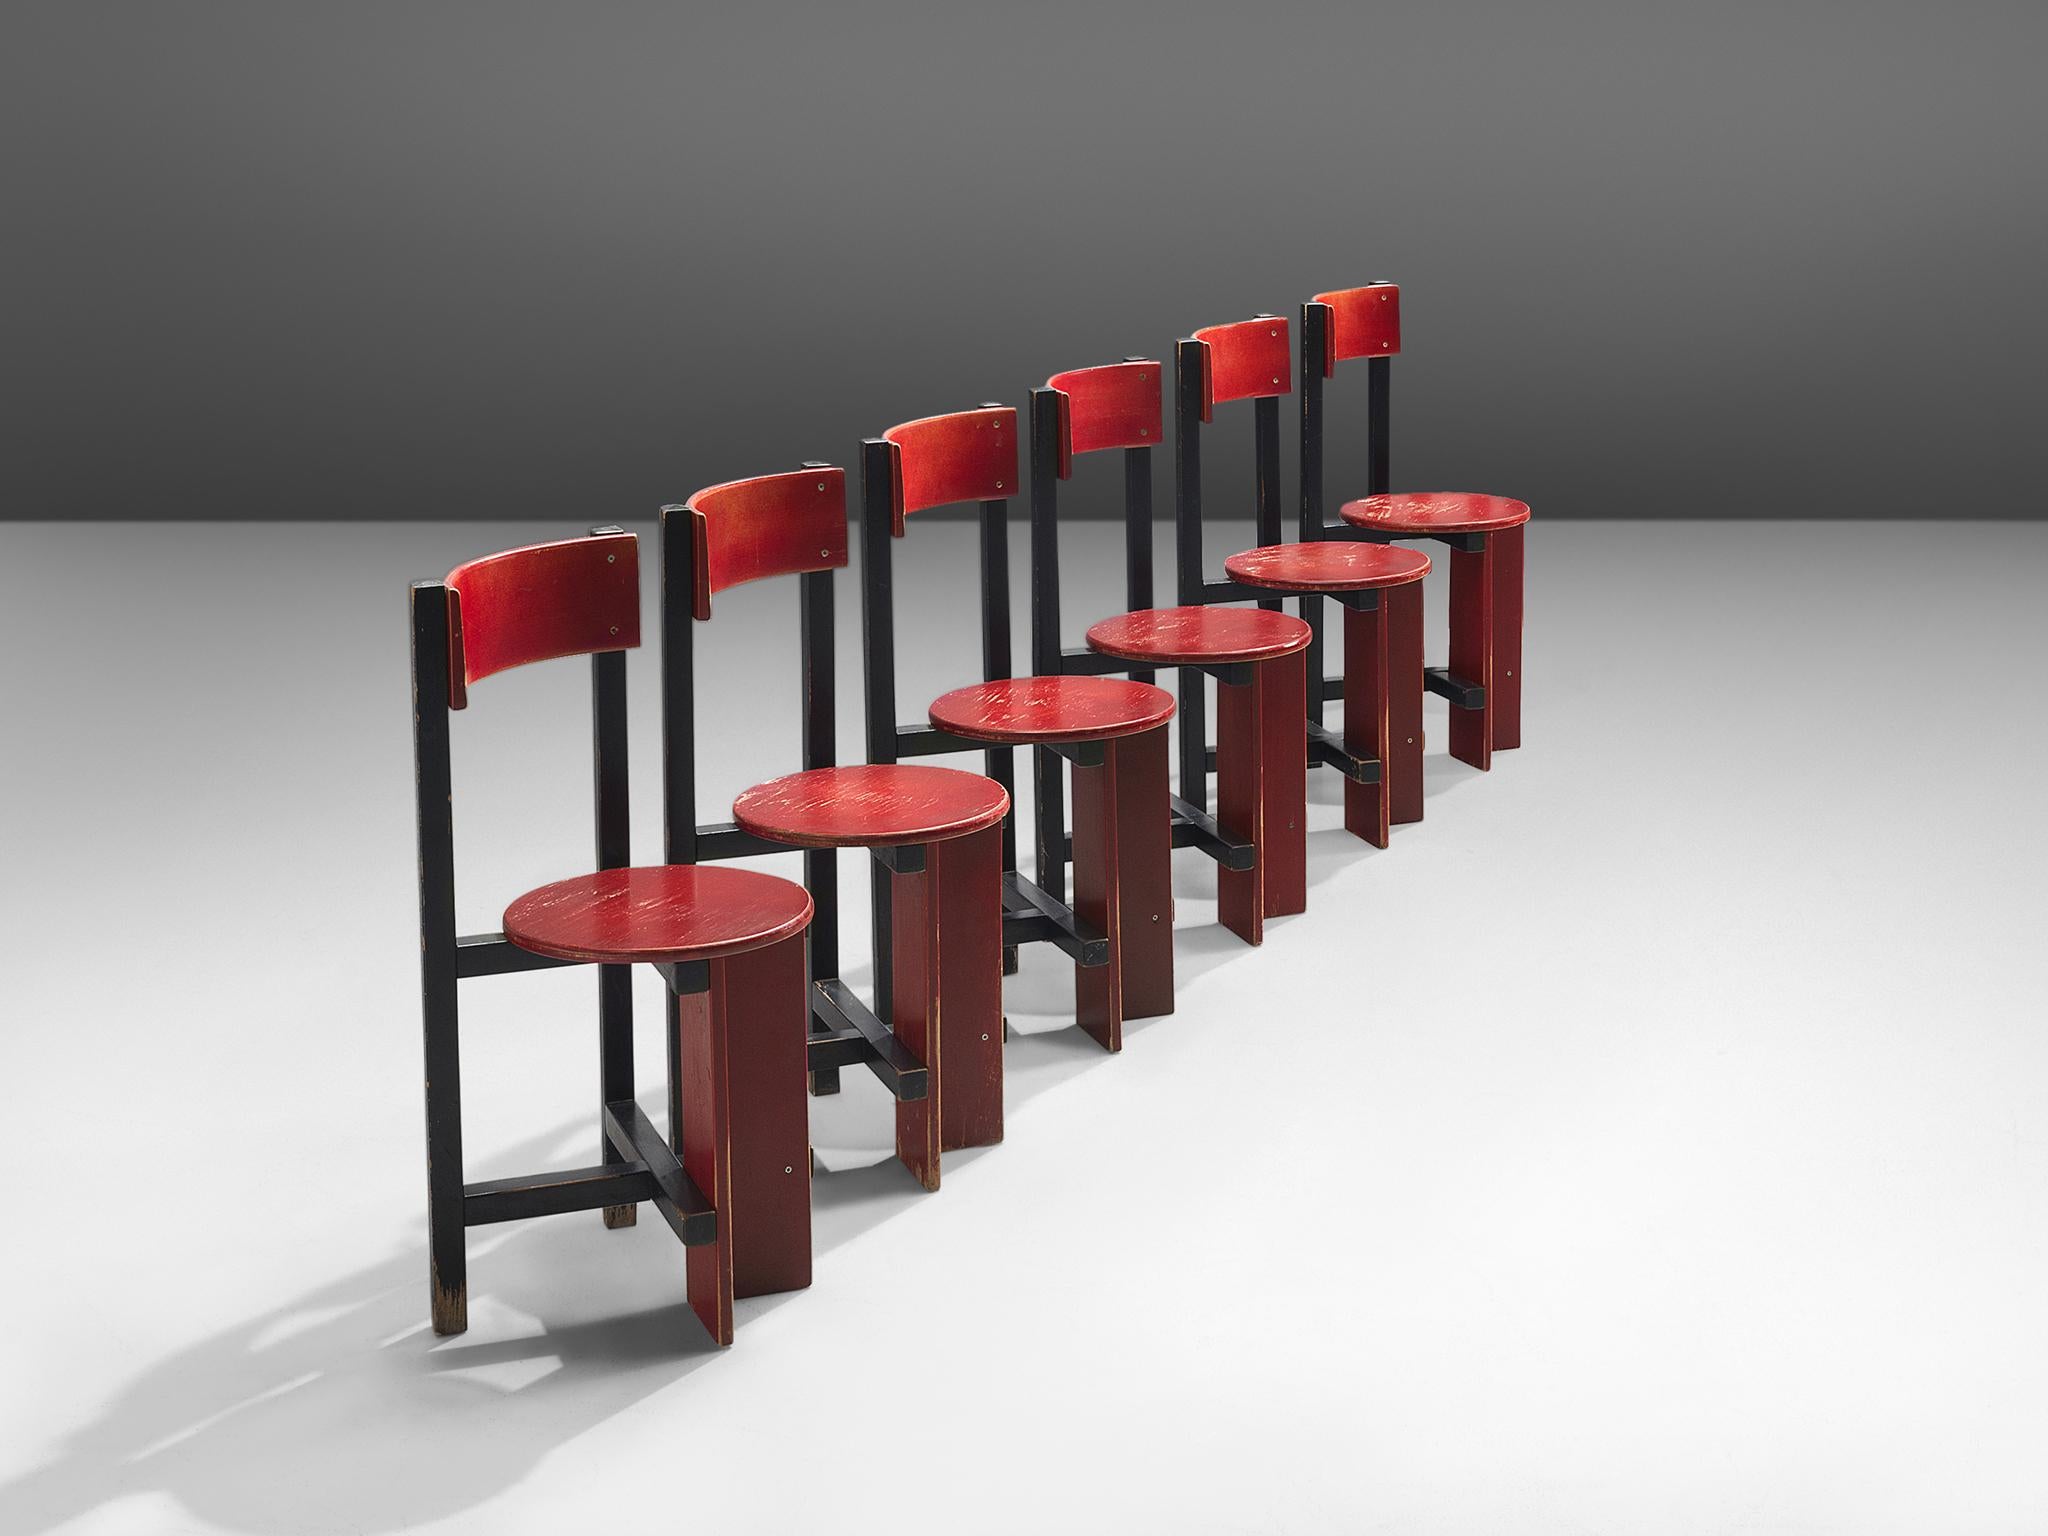 Rare 'Bastille' chairs, in lacquered wood, by Piet Blom, the Netherlands, 1968.

This sculptural set was originally designed for the University of Twente which was nicknamed the 'Bastille'. The chairs were designed in 1968 and only produced in an